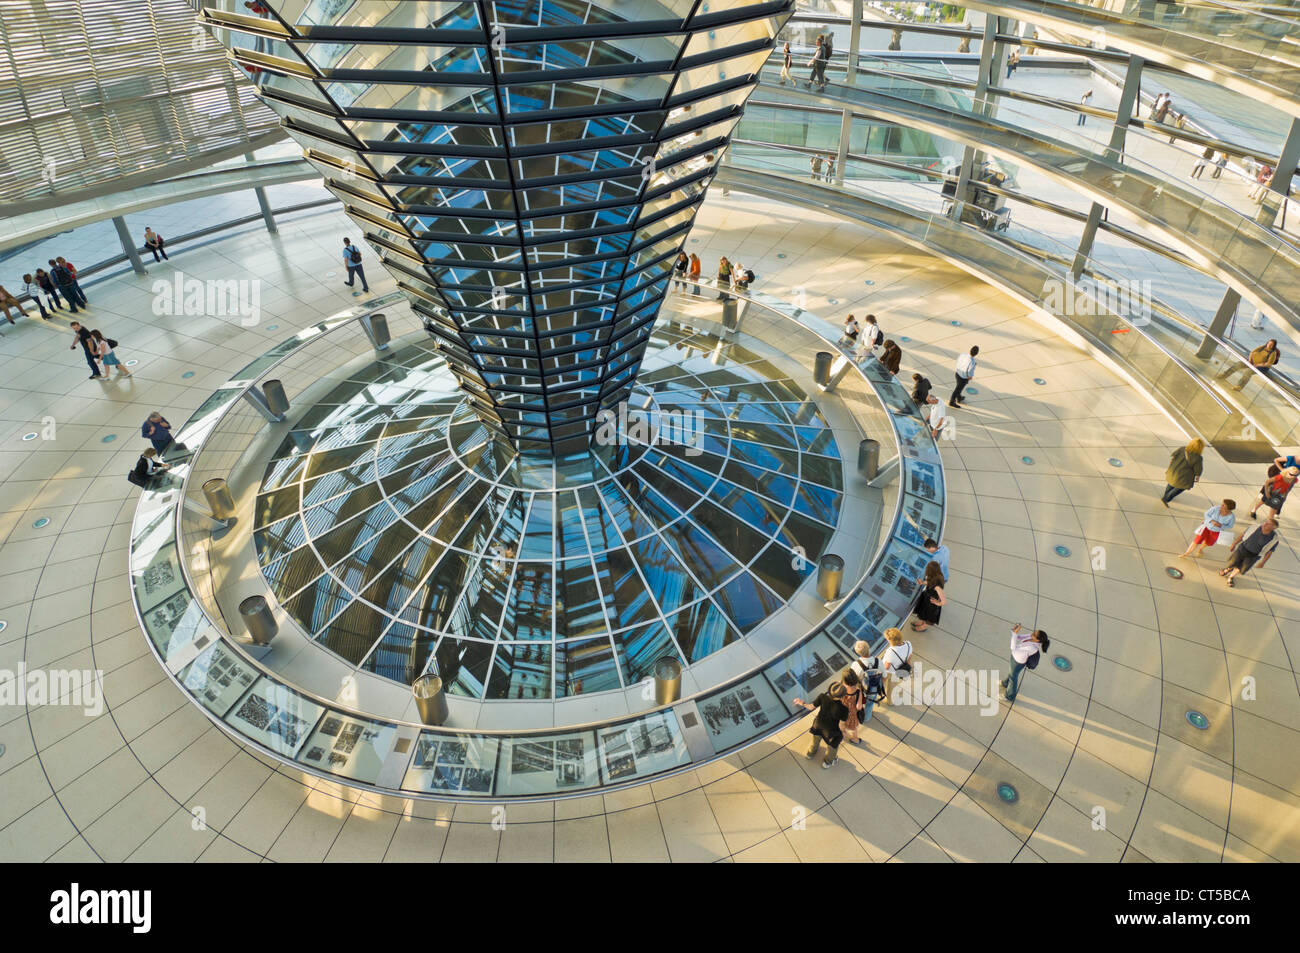 Glass dome and mirrored central glass funnel above the Plenary chamber of the Reichstag building Berlin Germany EU Europe Stock Photo